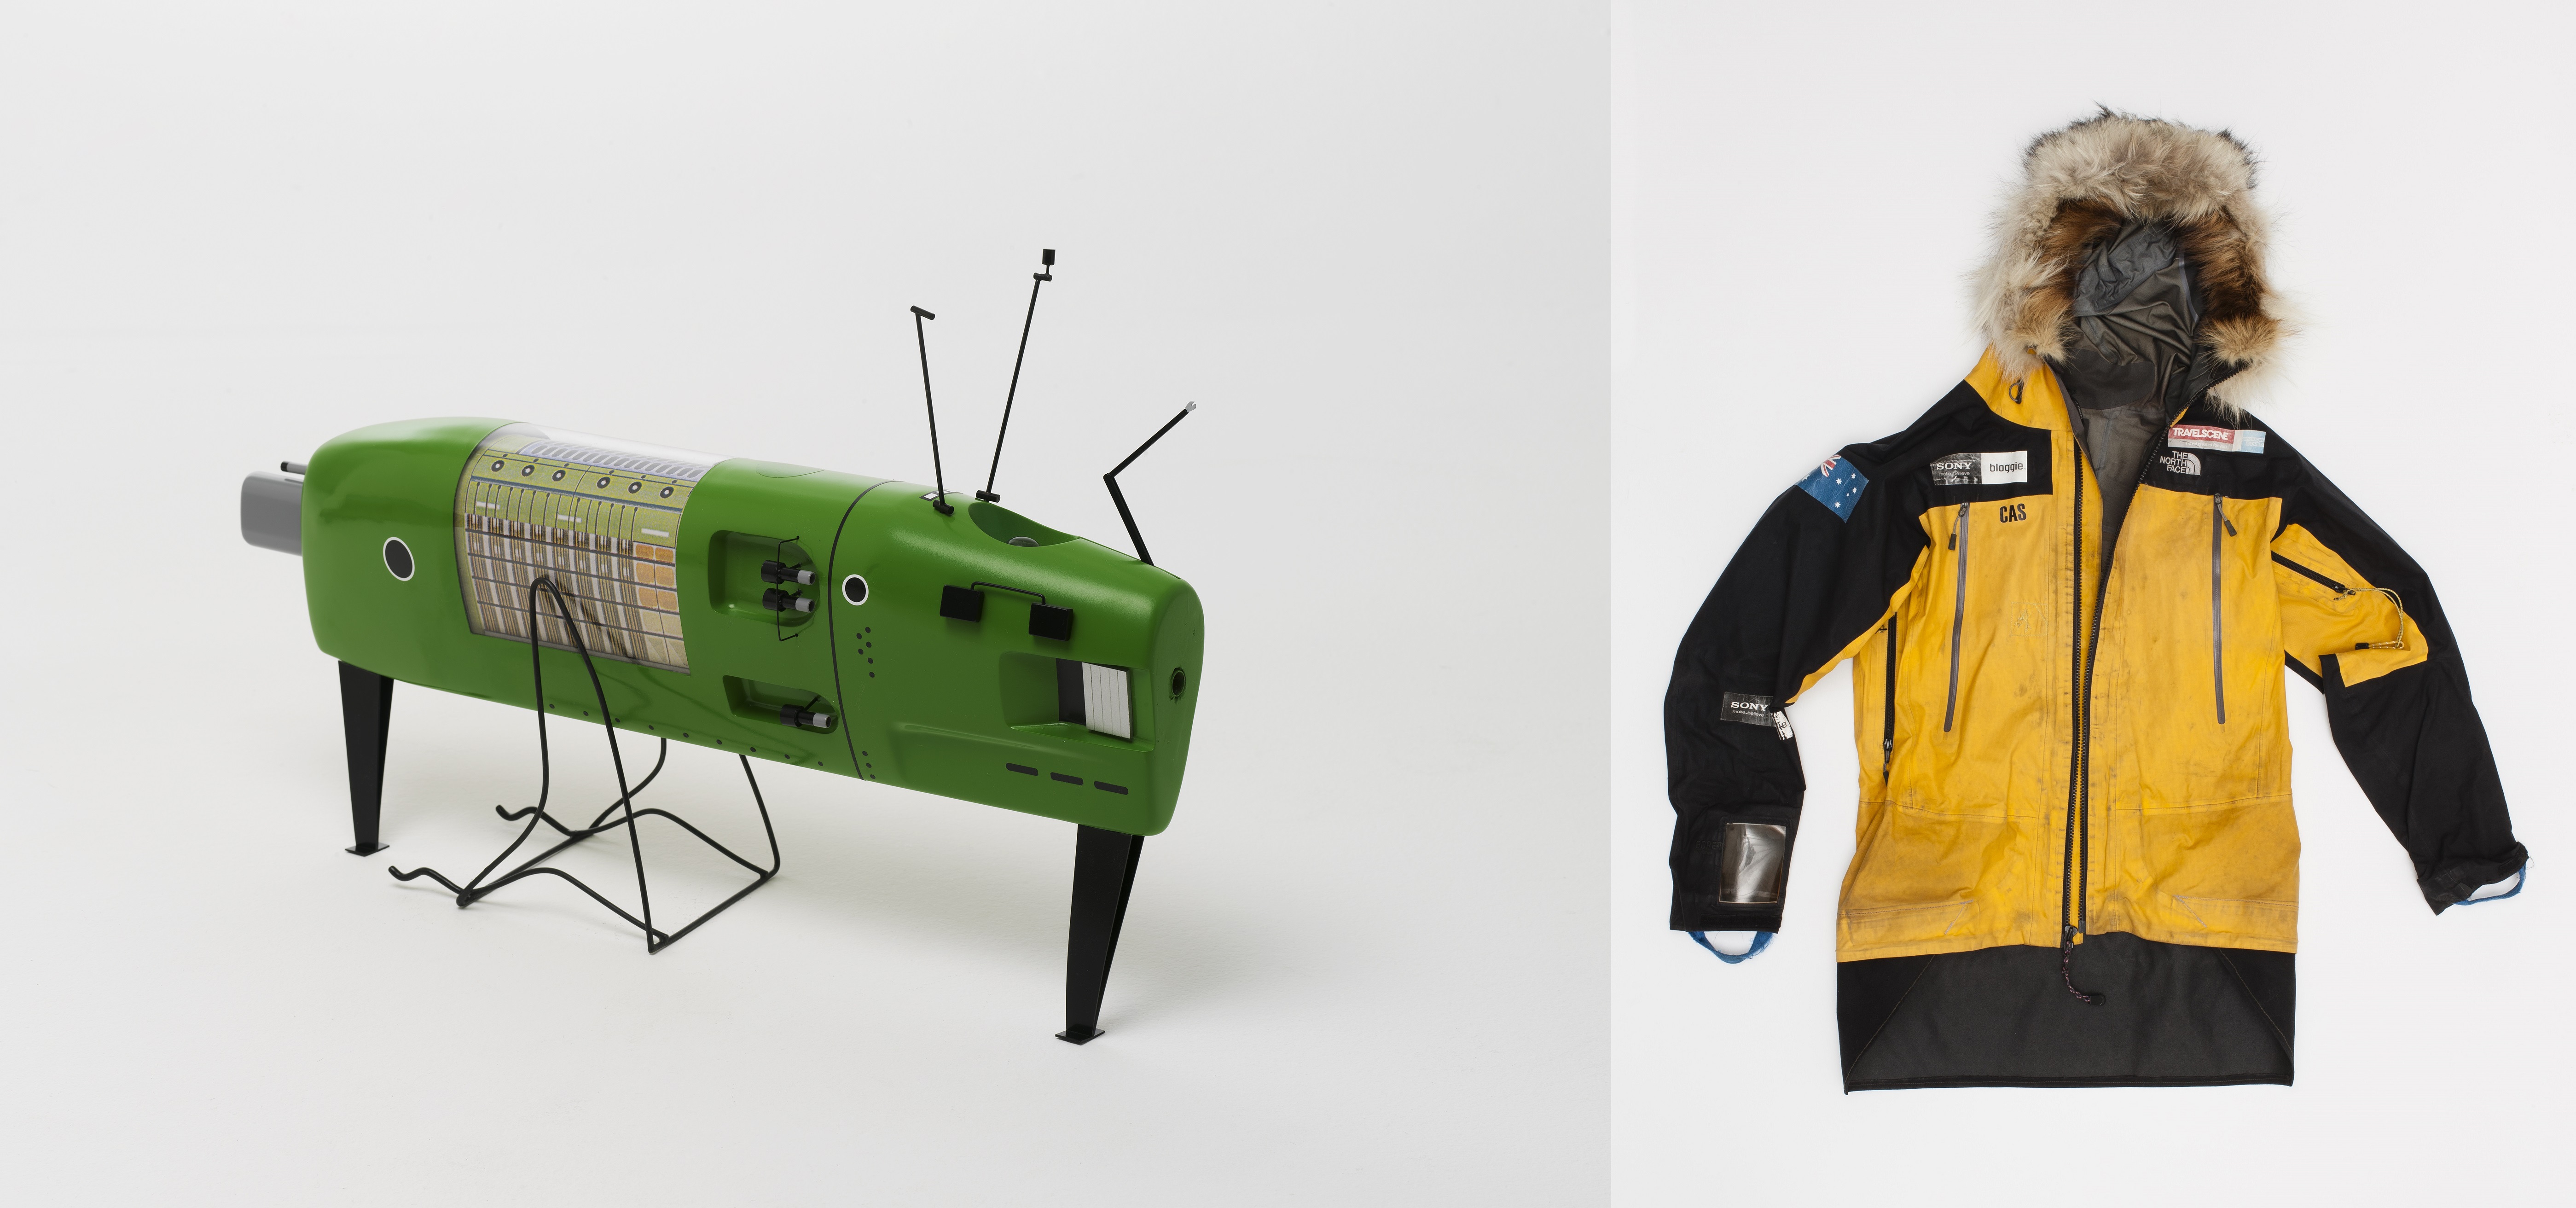 Two images side by side. Left: Model of a green submarine. There are various panels and instruments on the exterior of the vehicle. Right: Black and yellow weatherproof jacket with fur around the hood. There is an Australian flag on one sleeve and the name 'CAS' written on the chest.